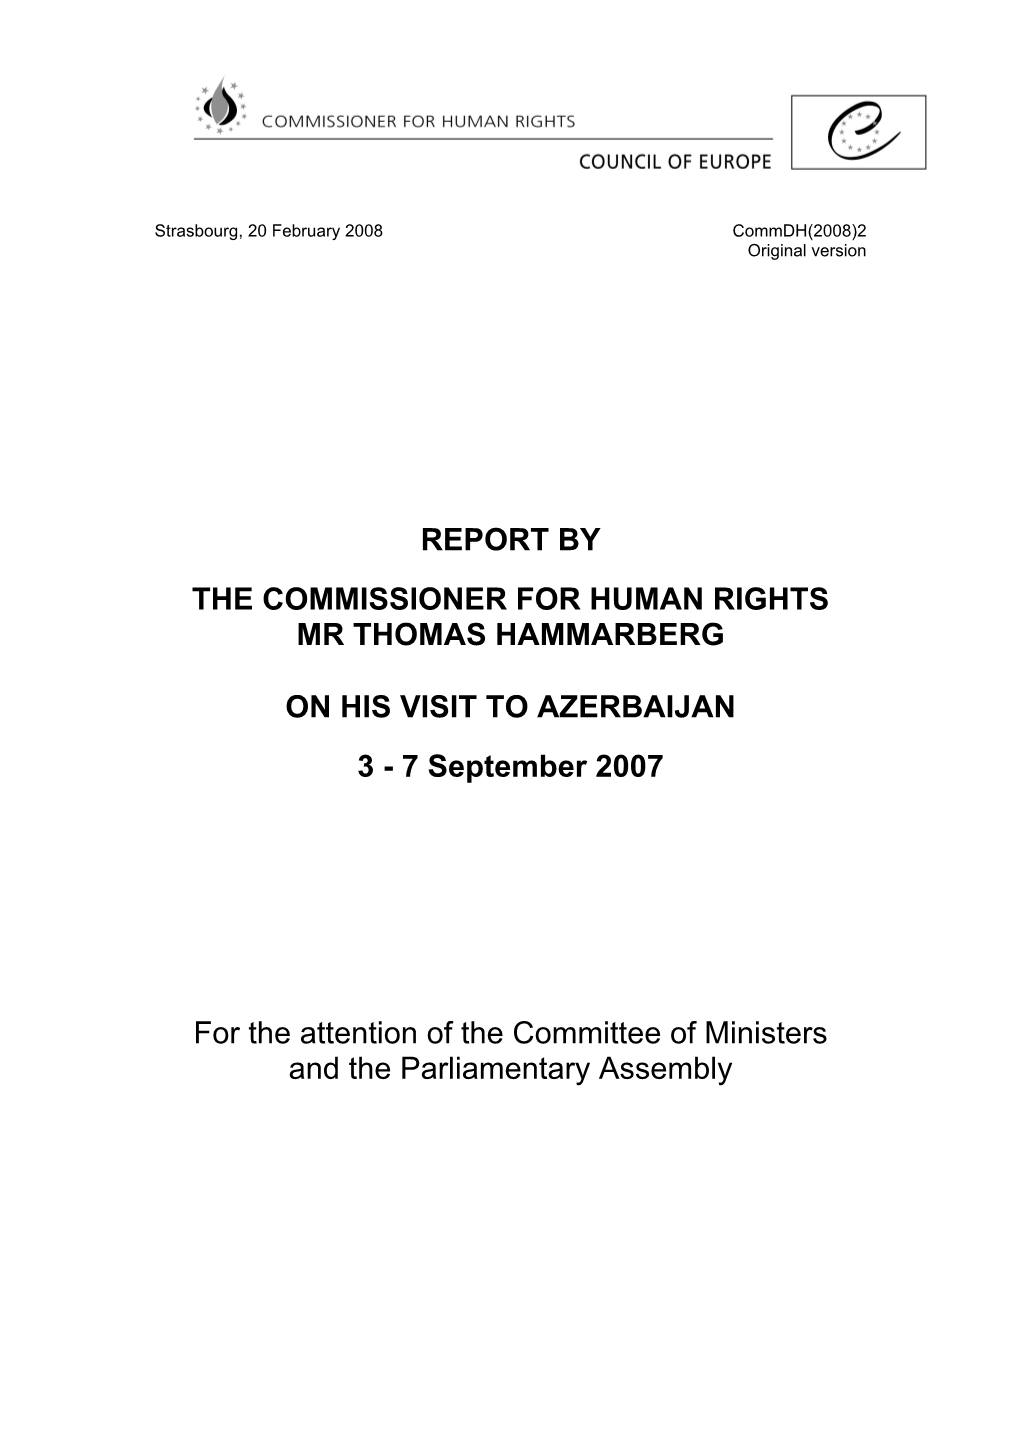 Report by the Commissioner for Human Rights Mr Thomas Hammarberg on His Visit to Azerbaijan 3